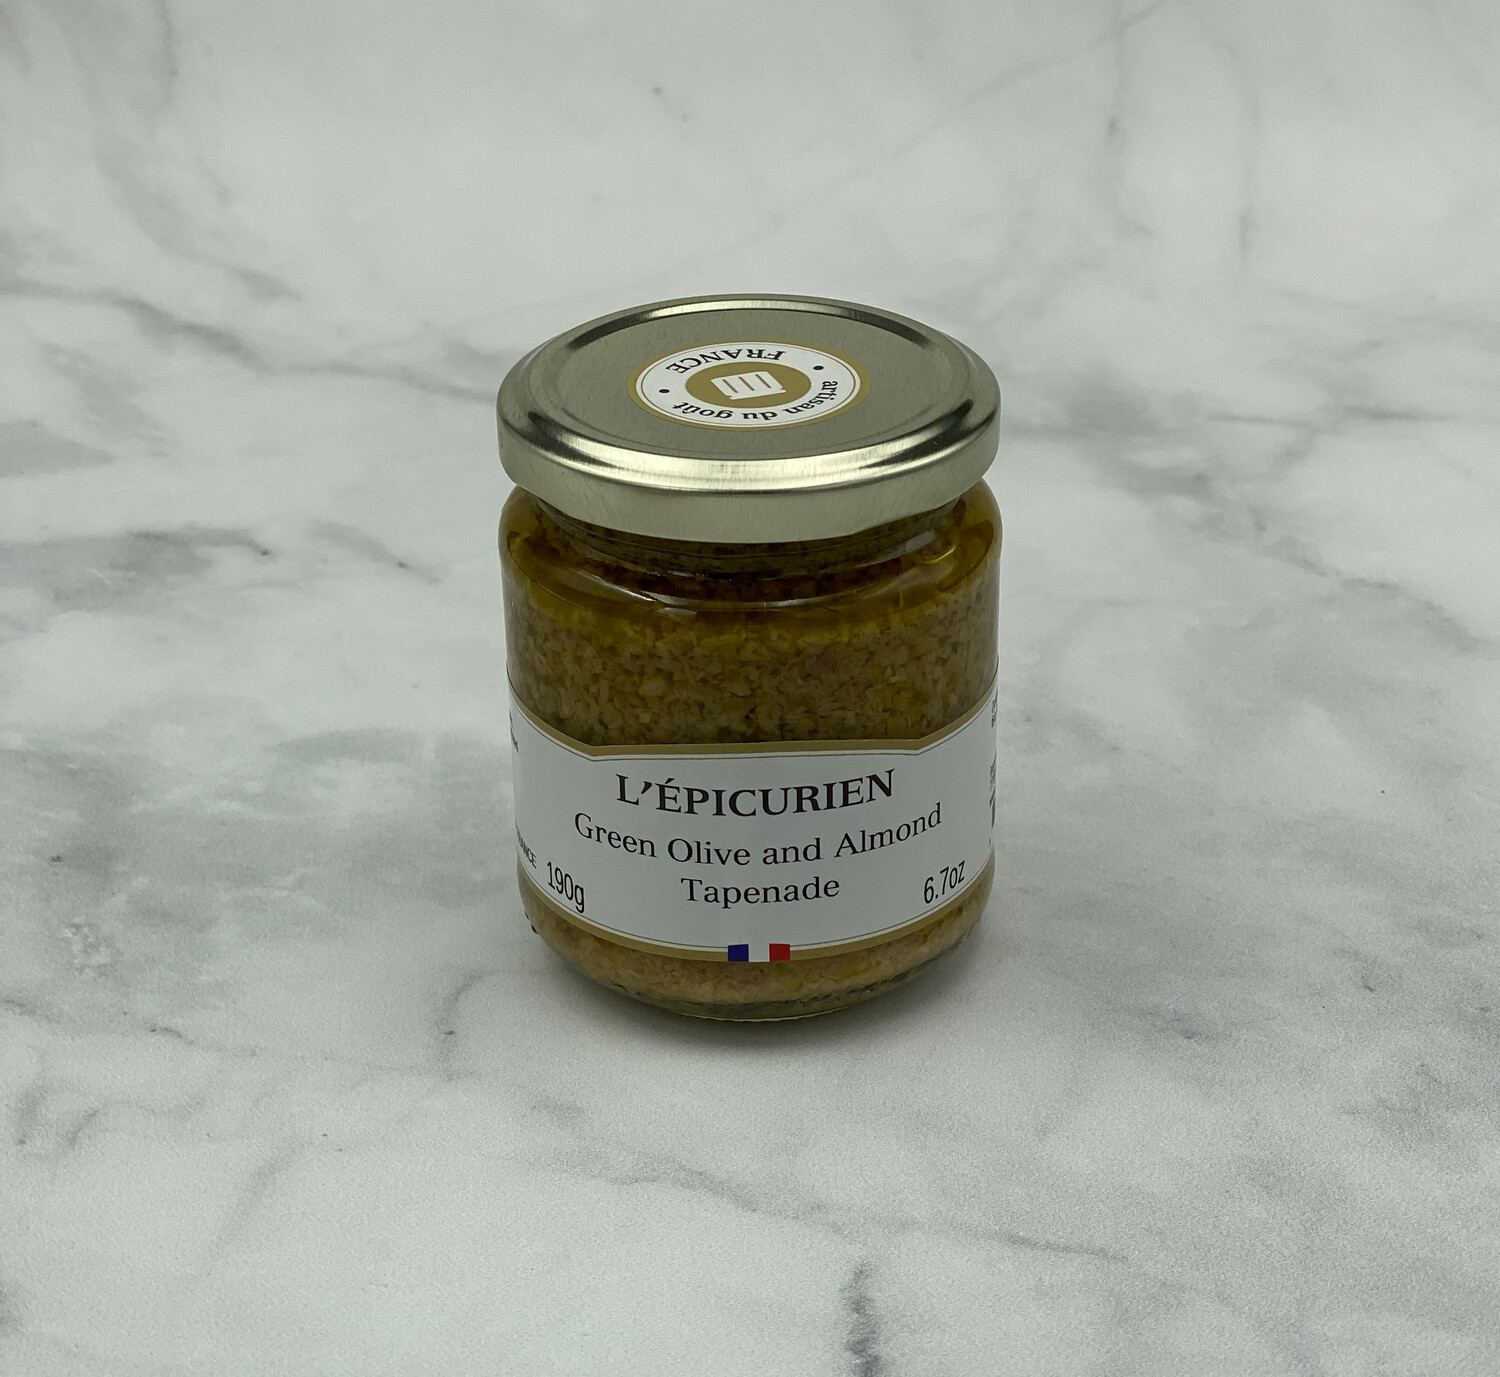 Green Olive and Almond Tapenade L'Epicurien